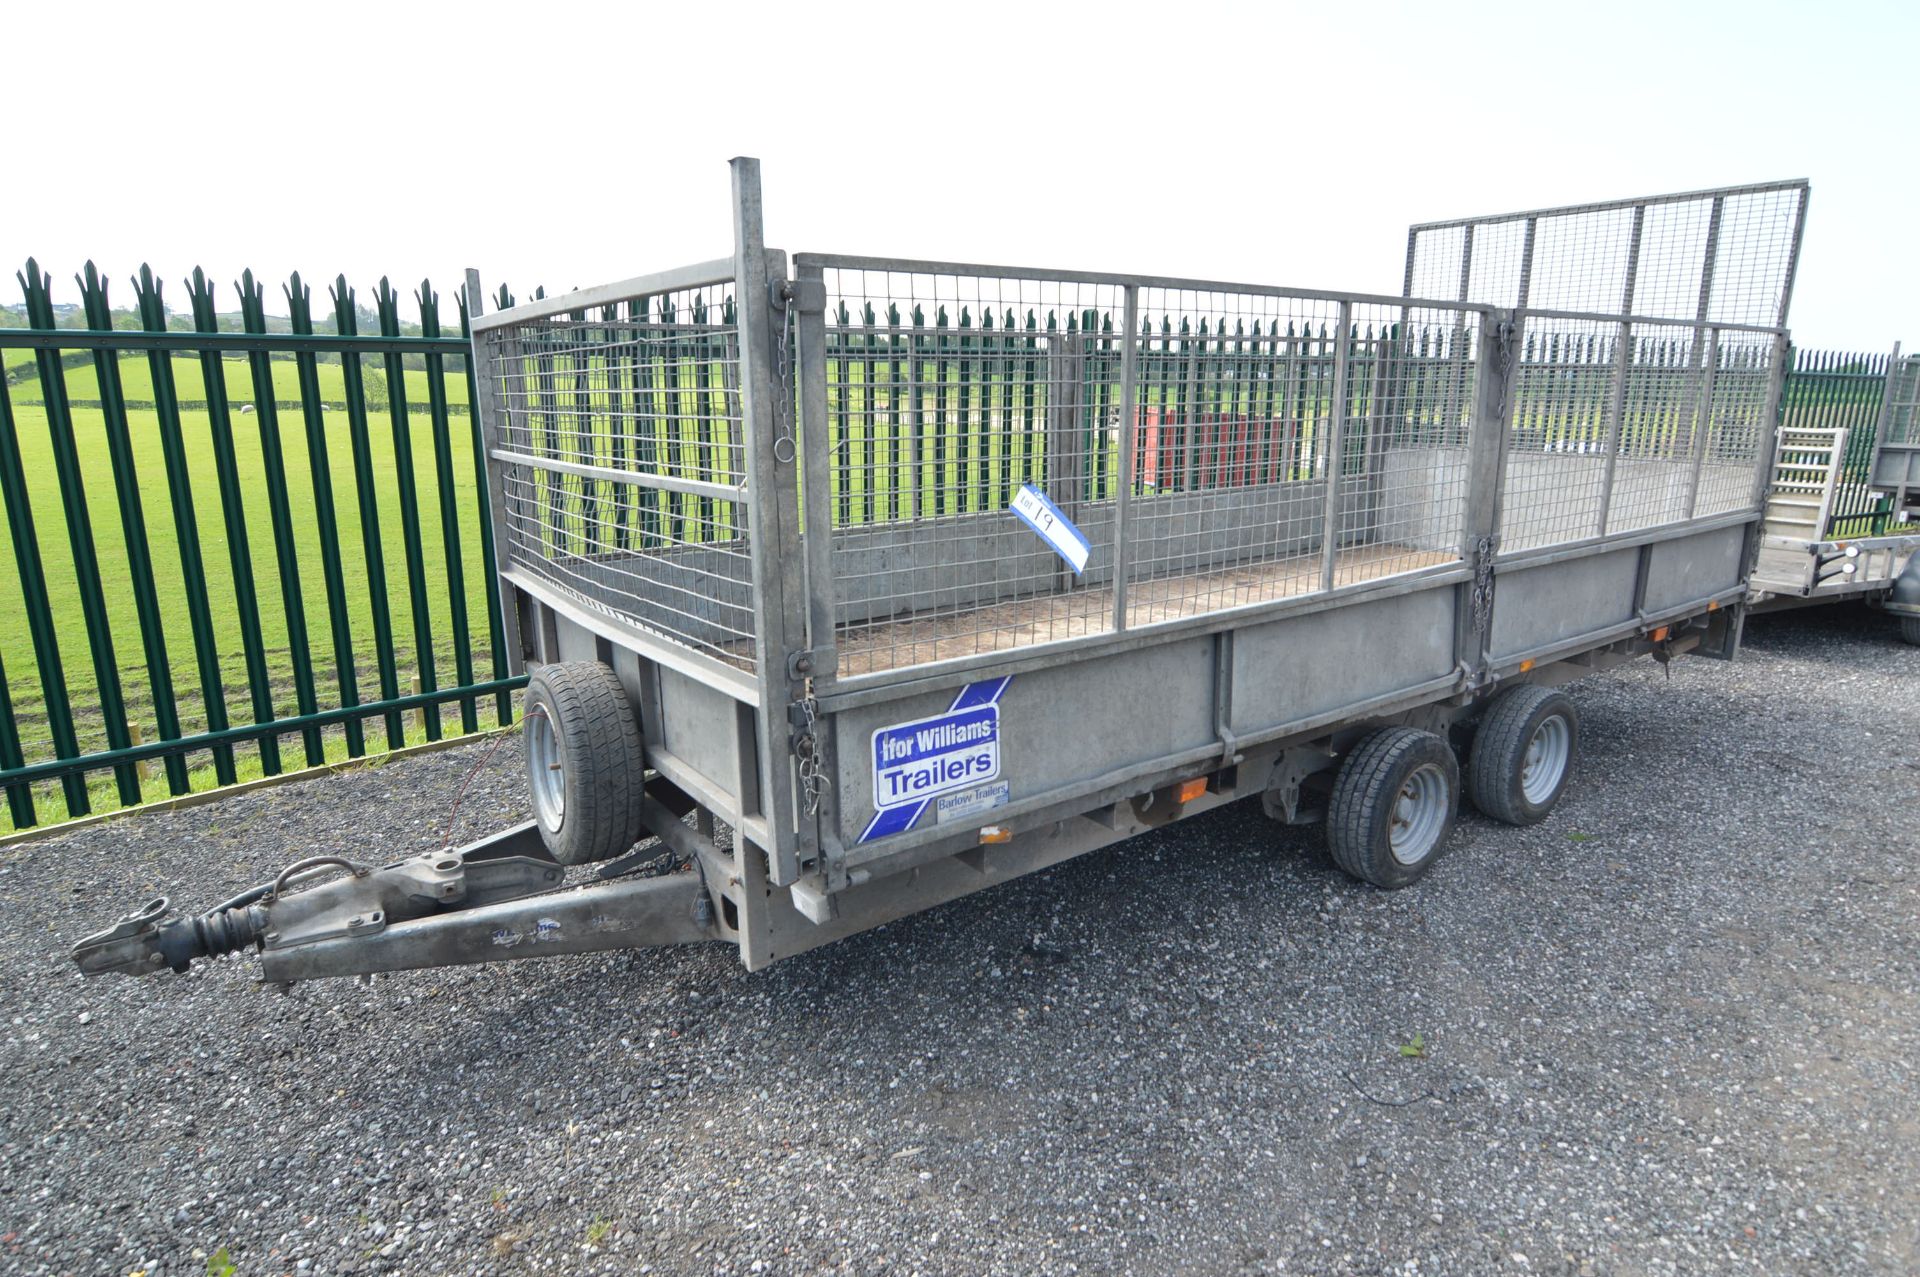 Ifor Williams LM166G TWIN AXLE TRAILER, serial no. SCK600000C5088459, 3500kg cap., 16ft long, with